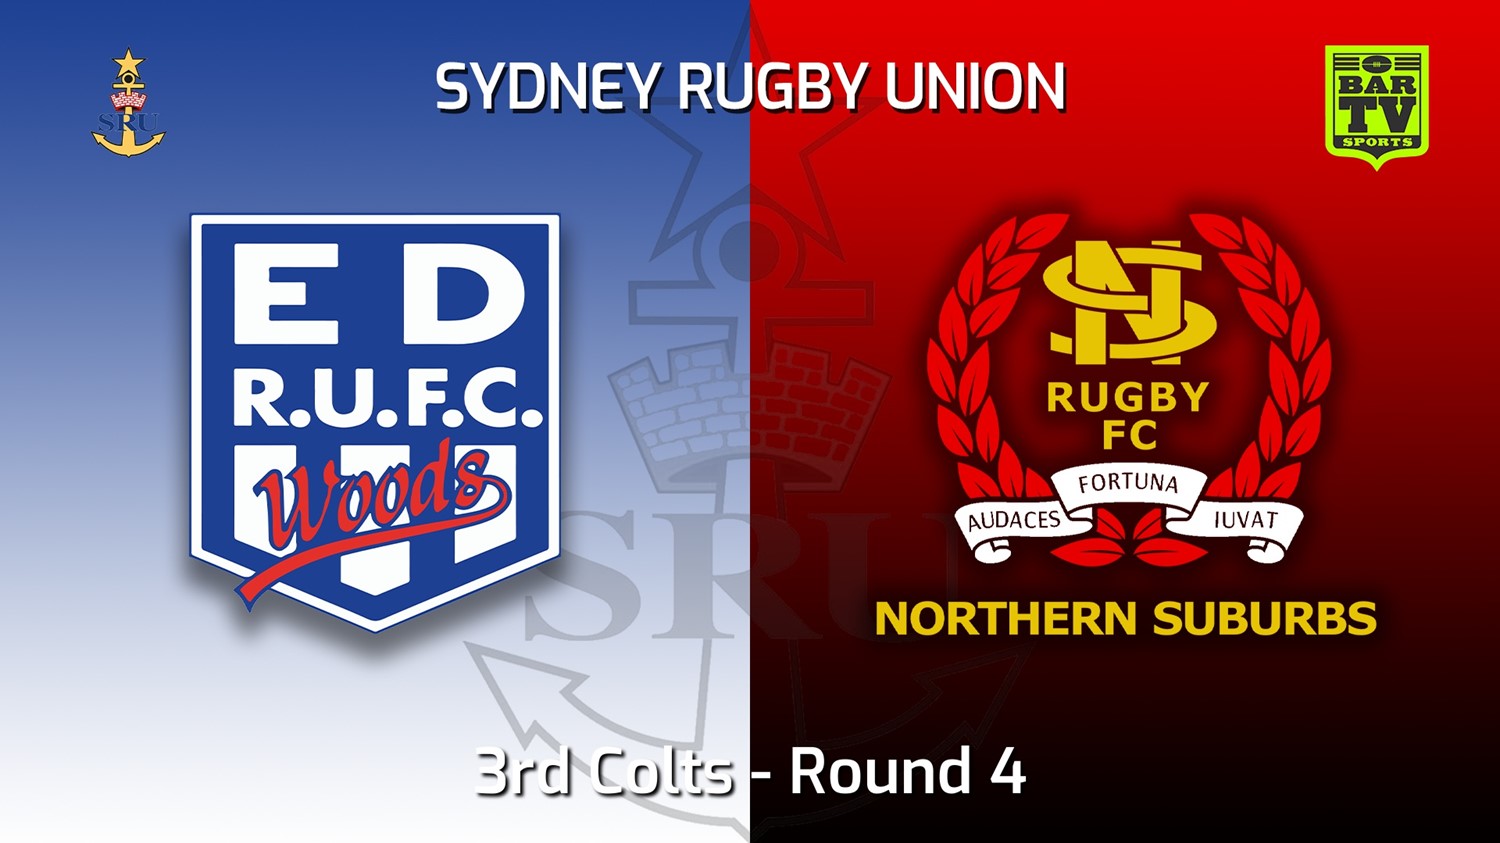 220423-Sydney Rugby Union Round 4 - 3rd Colts - Eastwood v Northern Suburbs Slate Image